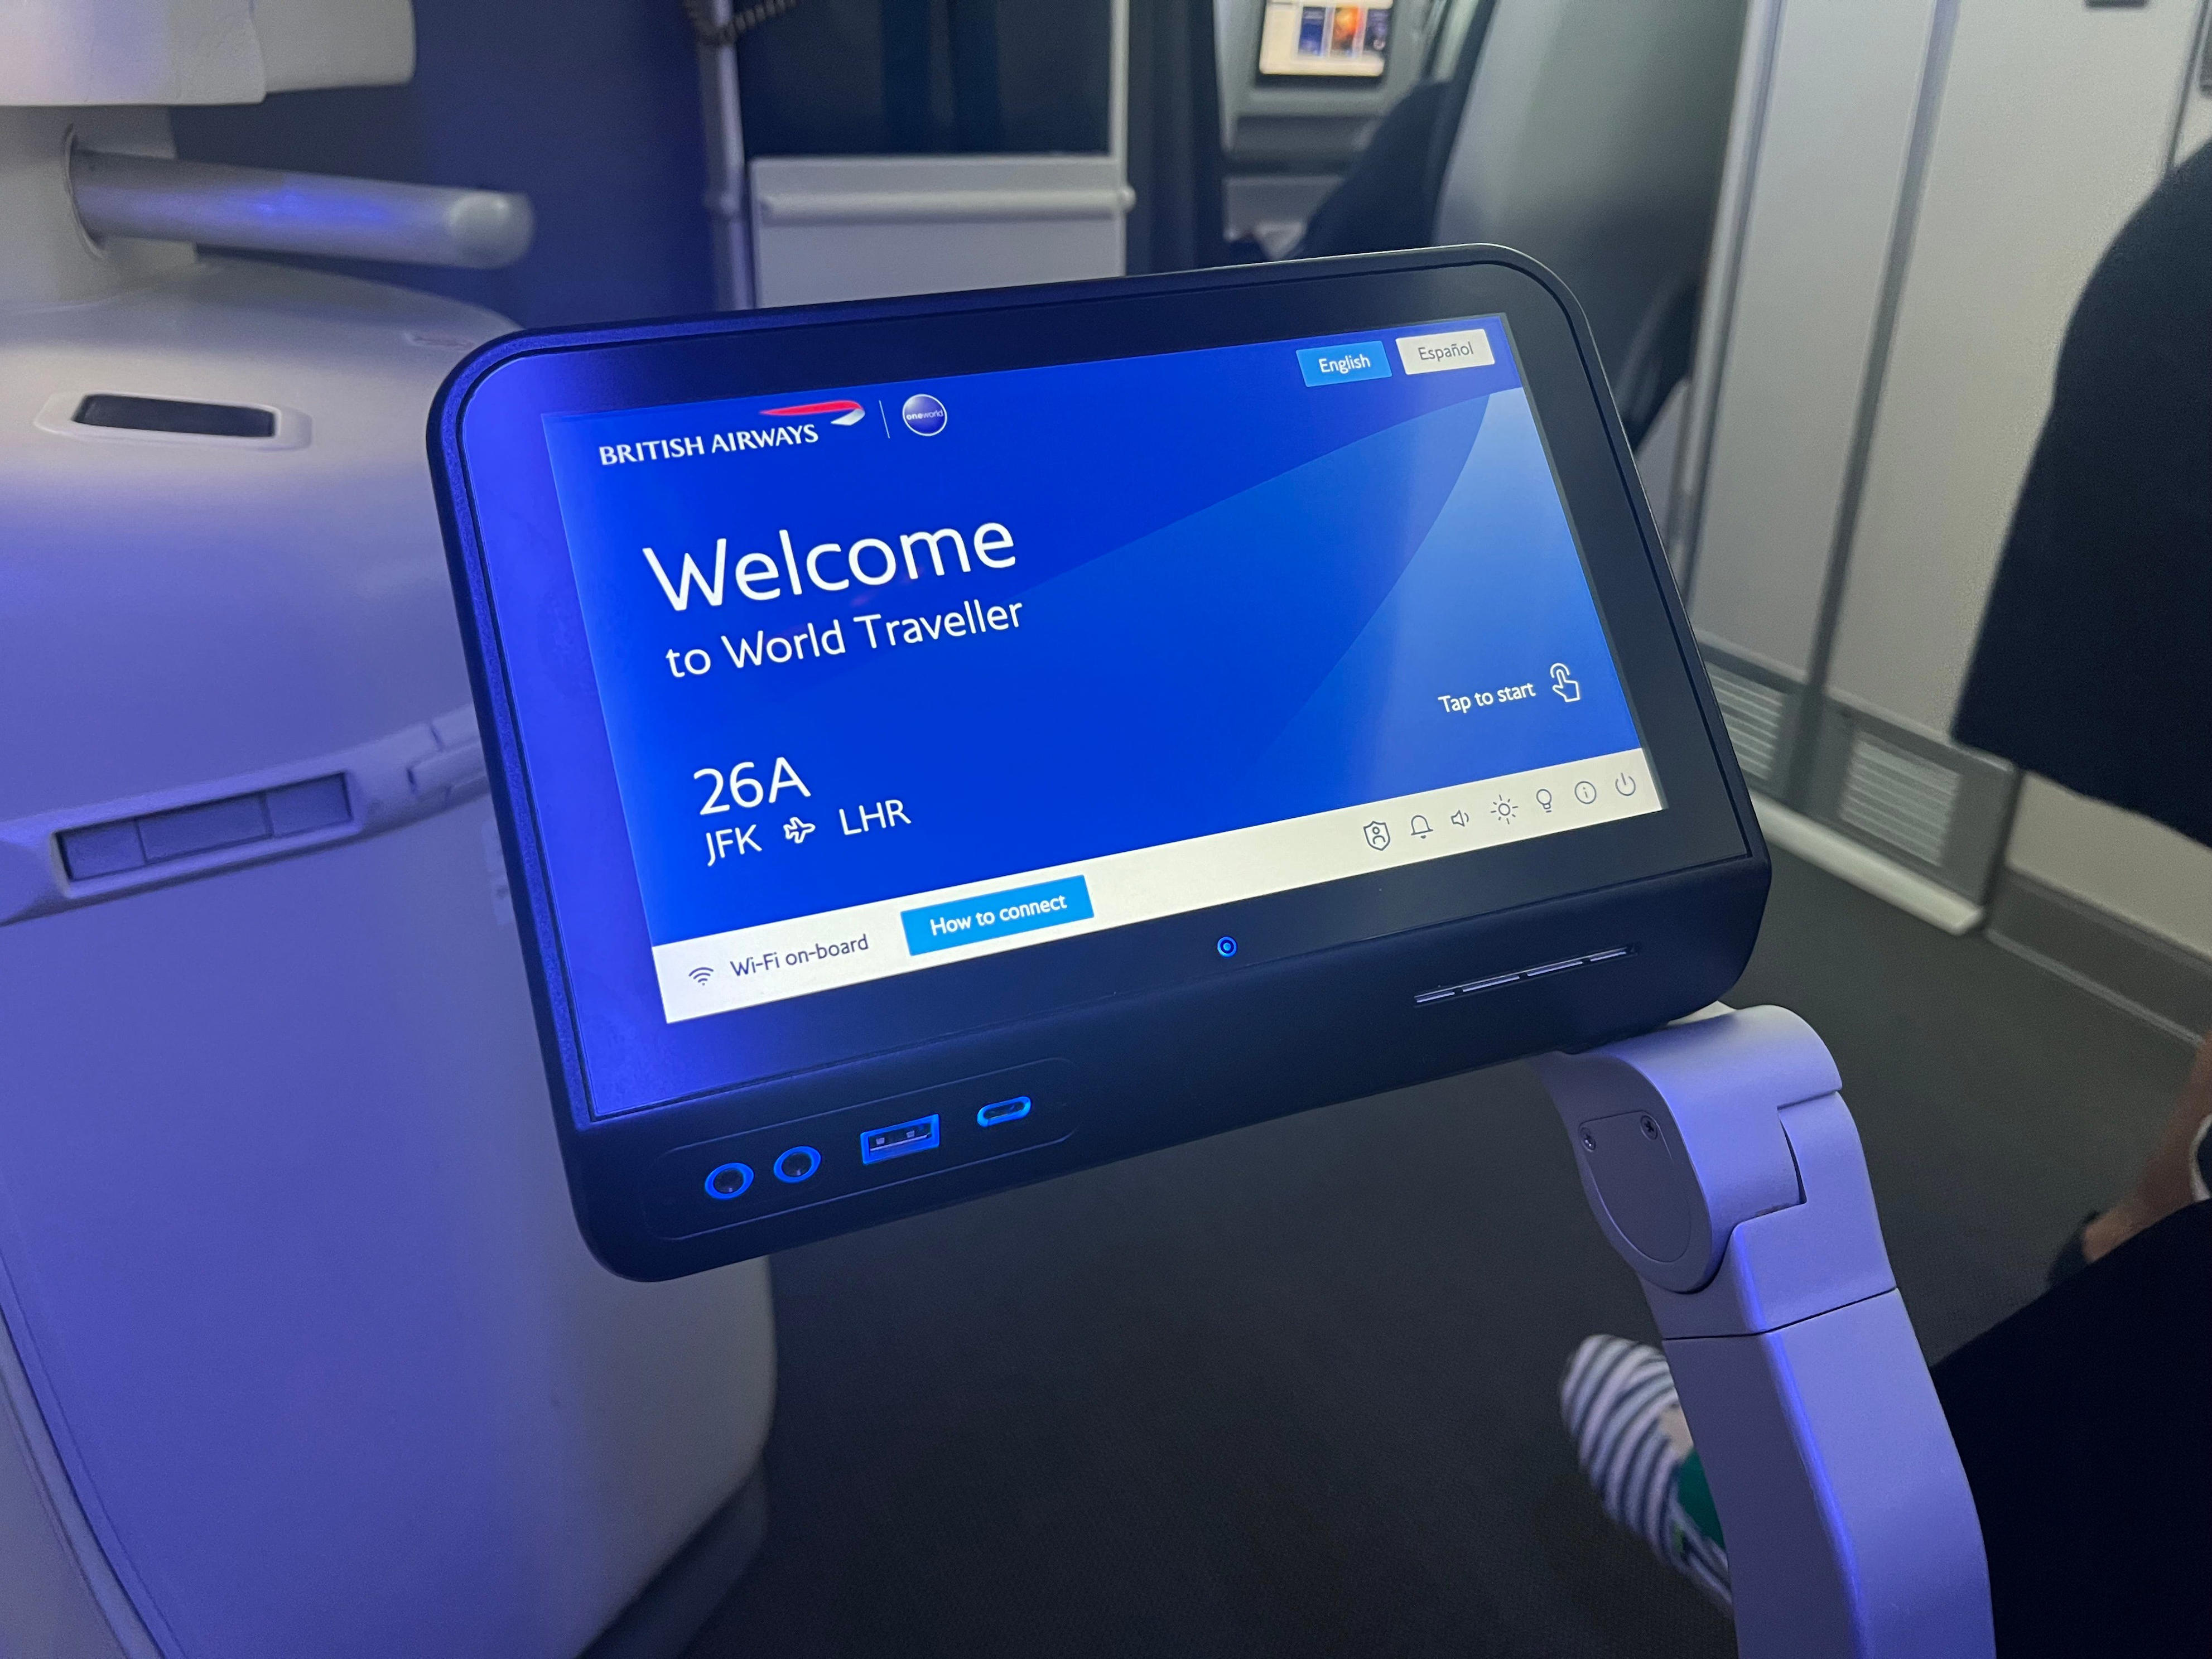 <p>I was assigned a random seat at check-in, so I didn't have much choice. However, I'll take the extra legroom — the up to 38 inches of <a href="https://www.seatguru.com/airlines/British_Airways/British_Airways_Boeing_777-200B_2.php">pitch</a> was better than the 31 inches offered in the rows behind me.</p><p>31 inches for standard economy seats is on par with competitors like Delta, United, Finnair, and Virgin Atlantic Airways.</p>